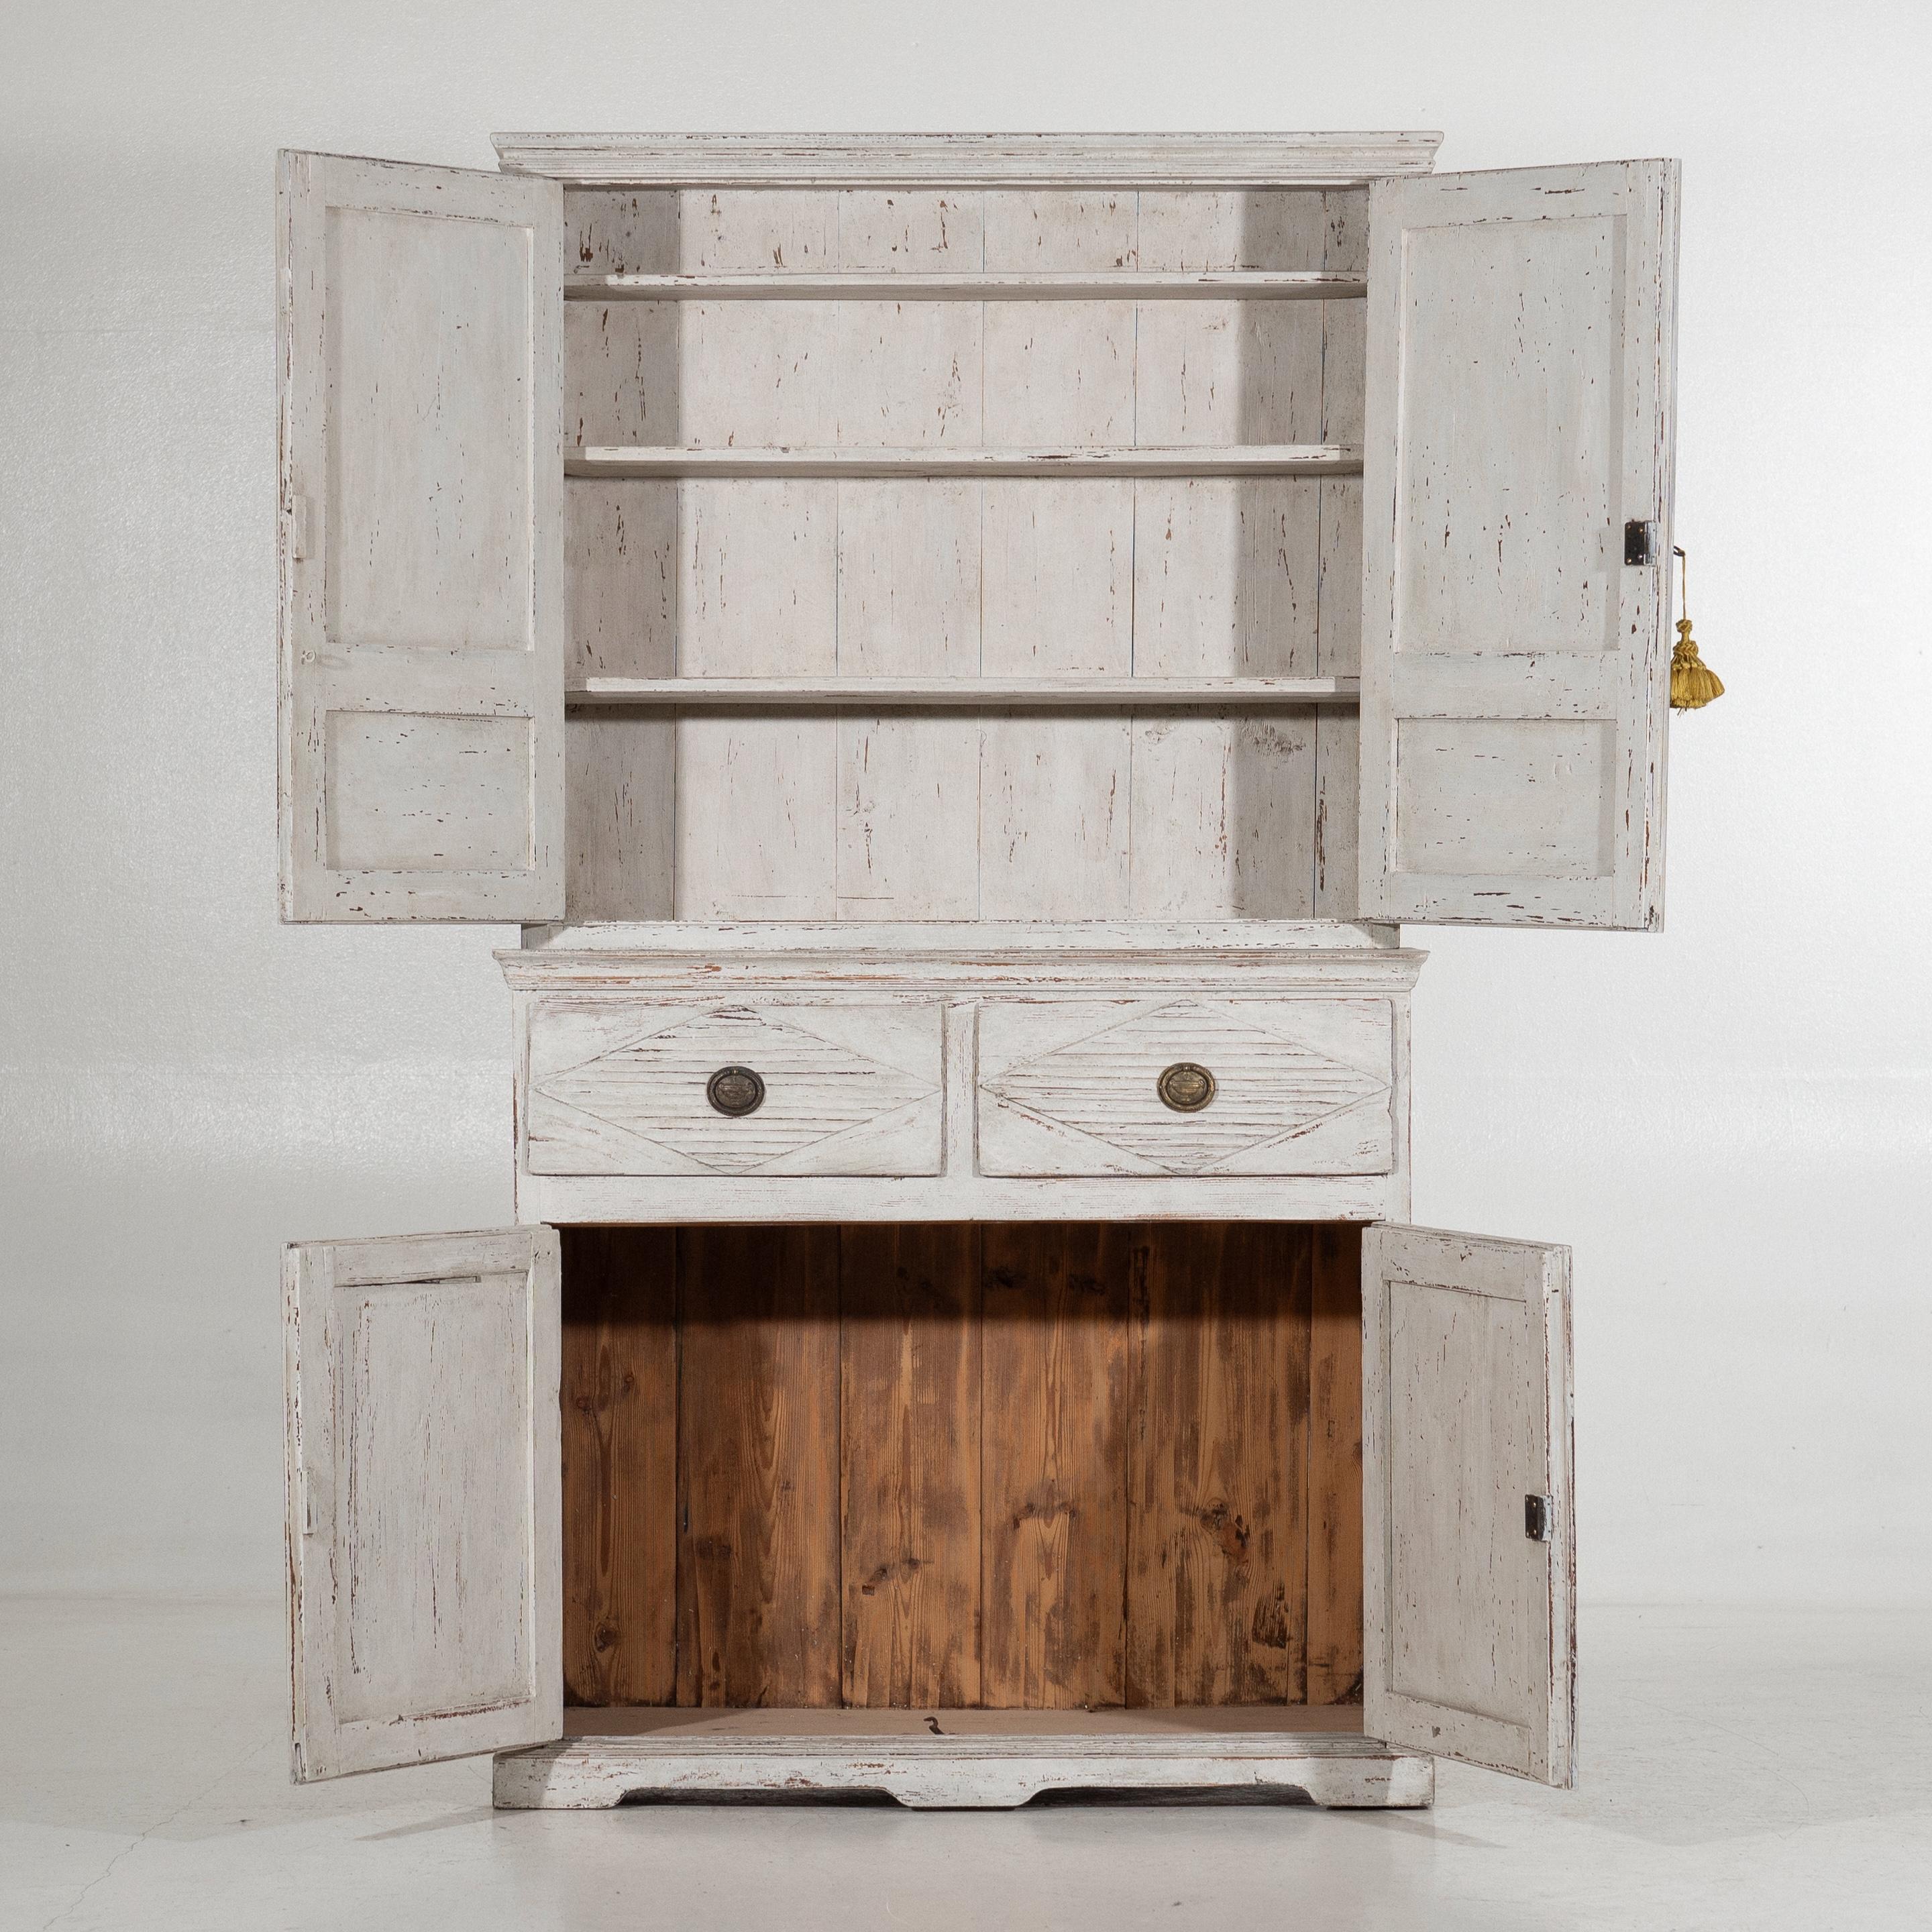 Beautiful Gustavian style cabinet, with carvings and hardware, circa 100 years old.
H. 202 W. 116 D-bottom. 52 D-top. 34 cm.
H. 79.5 W. 45.6 D-bottom. 20.4 D-top. 13.3 in.